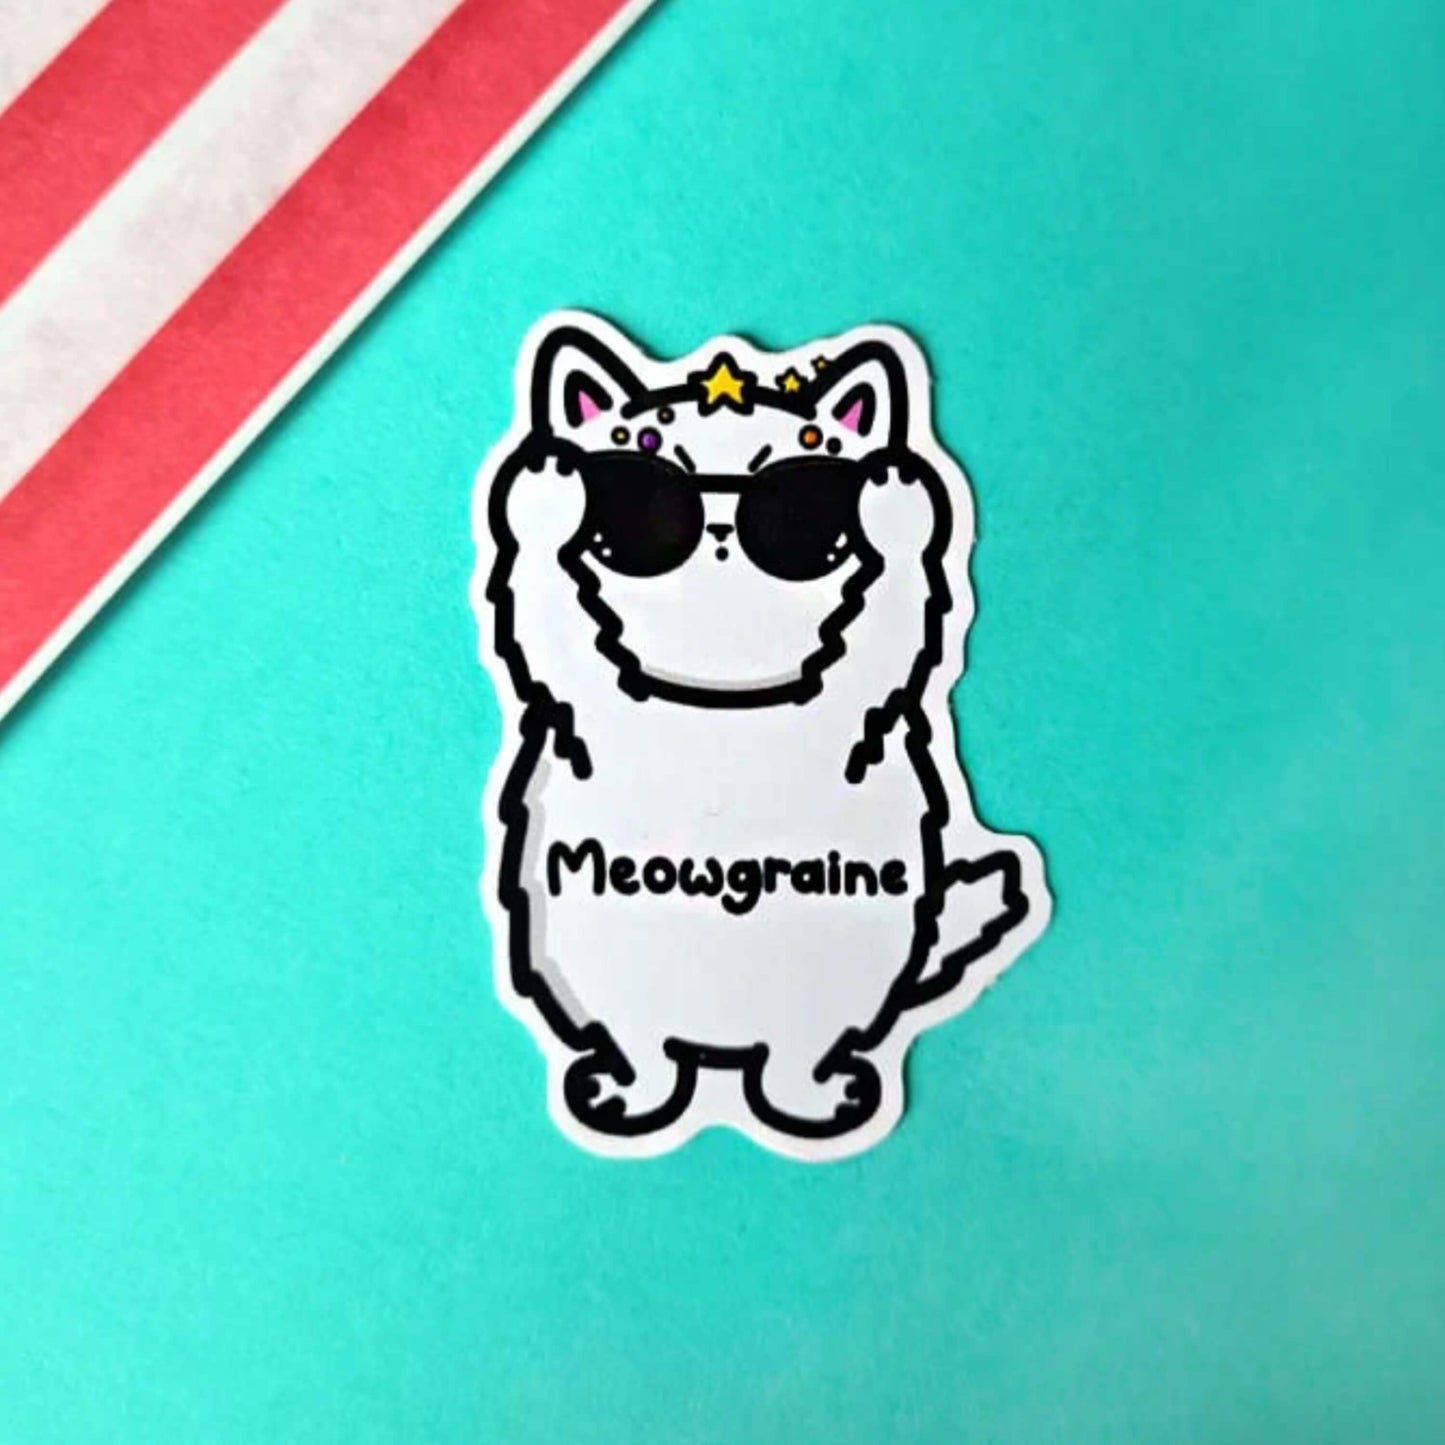 The Meowgraine Cat Sticker - Migraine on a blue background with a red stripe candy bag. A white stressed cat sticker clutching a pair of black sunglasses to its eyes with multicoloured spots and stars over its head, across its middle reads 'meowgraine'. The hand drawn design is raising awareness for migraines and headaches.